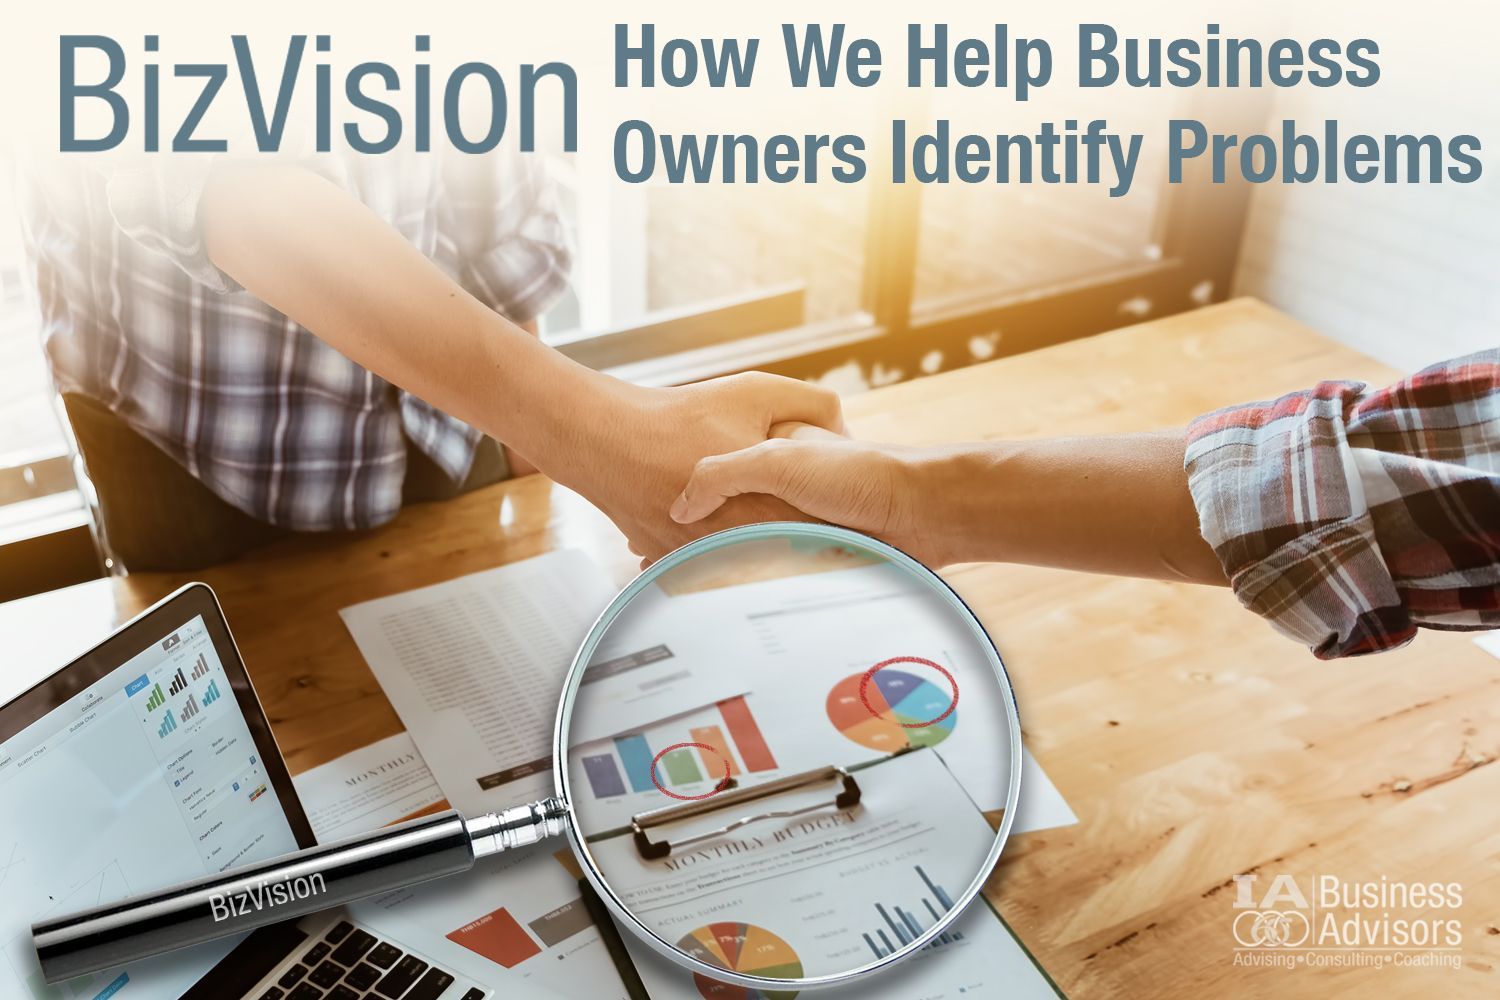 BizVision: How We Help Business Owners Identify Problems